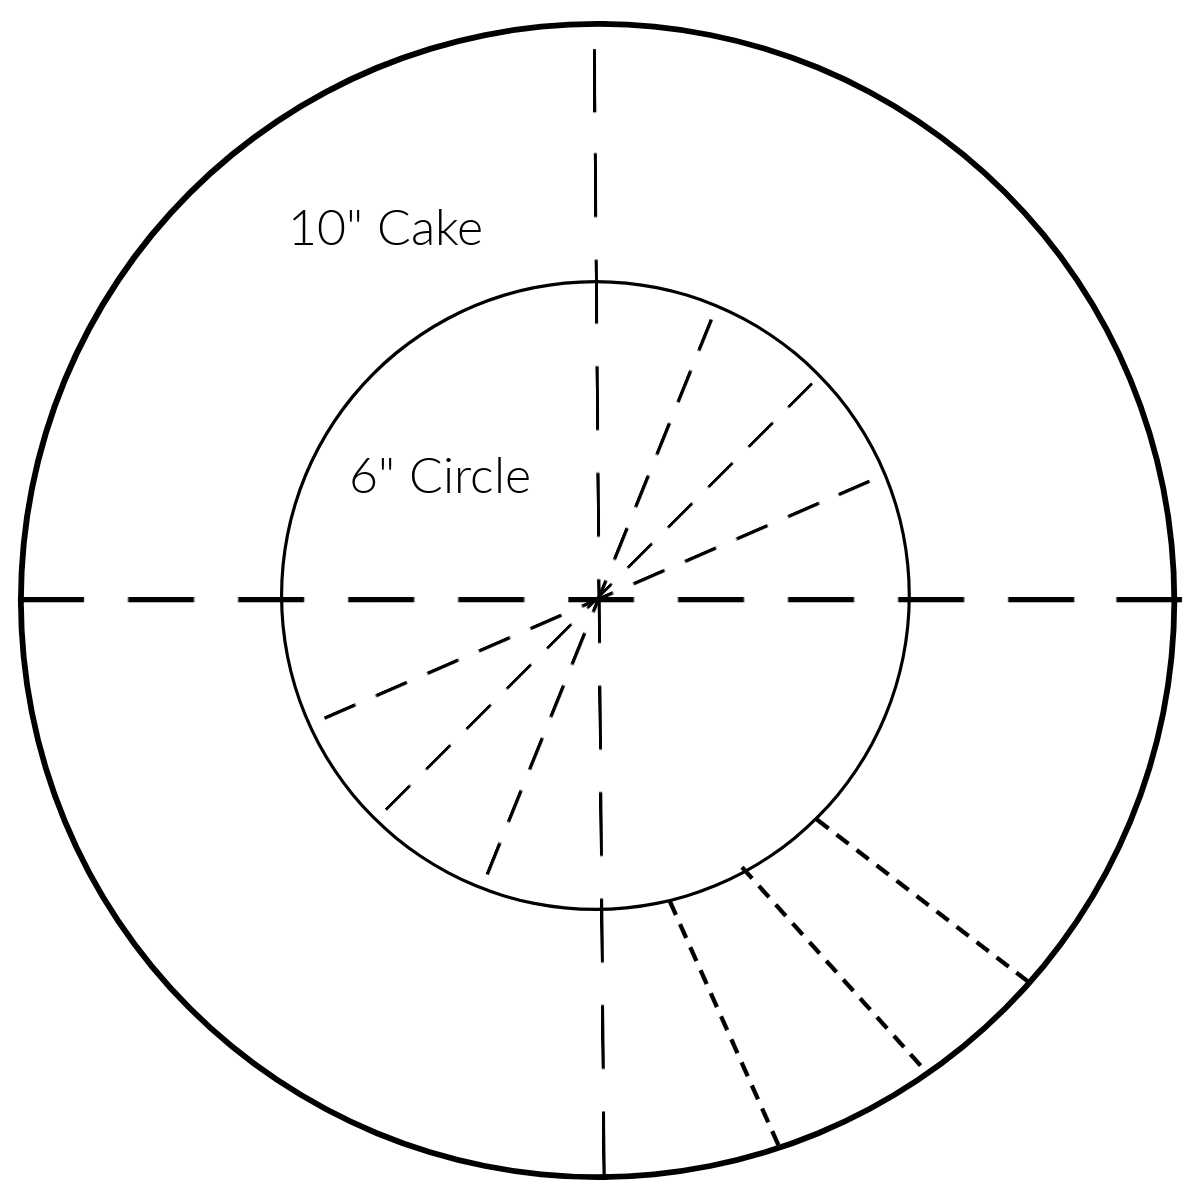 Diagram showing how to cut a 10 inch cake to get 40 servings.